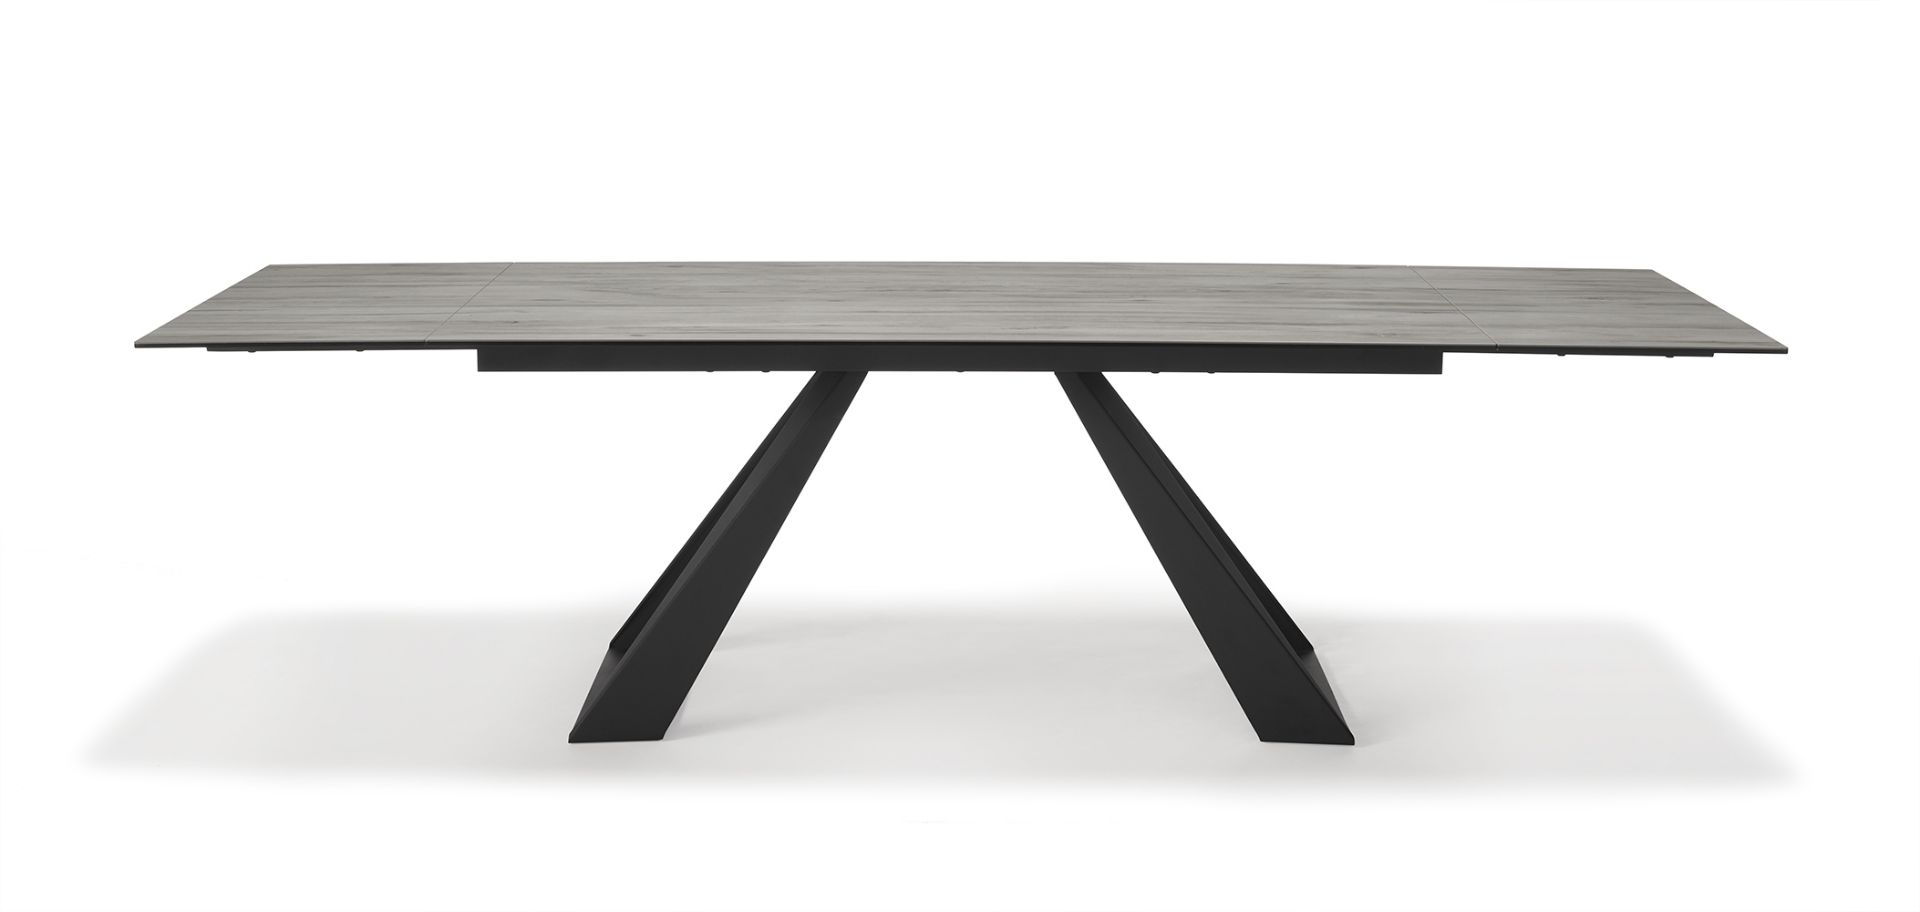 Spartan Dining Table by Kesterport The Spartan Dining Table is part of a sophisticated collection of - Image 2 of 4